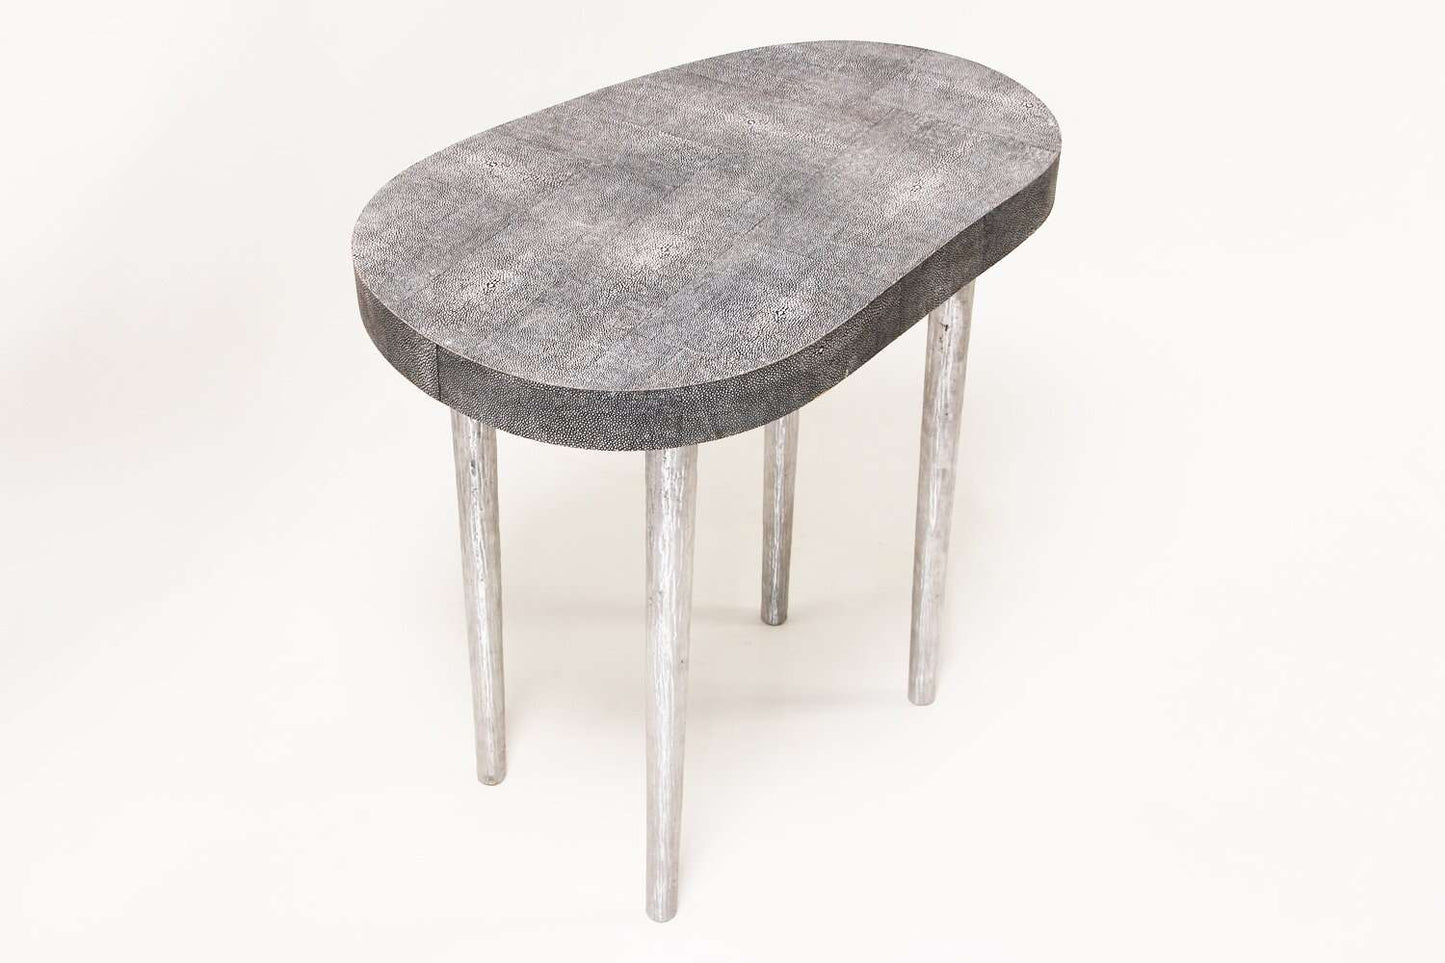 Mango Side Table in Charcoal Shagreen